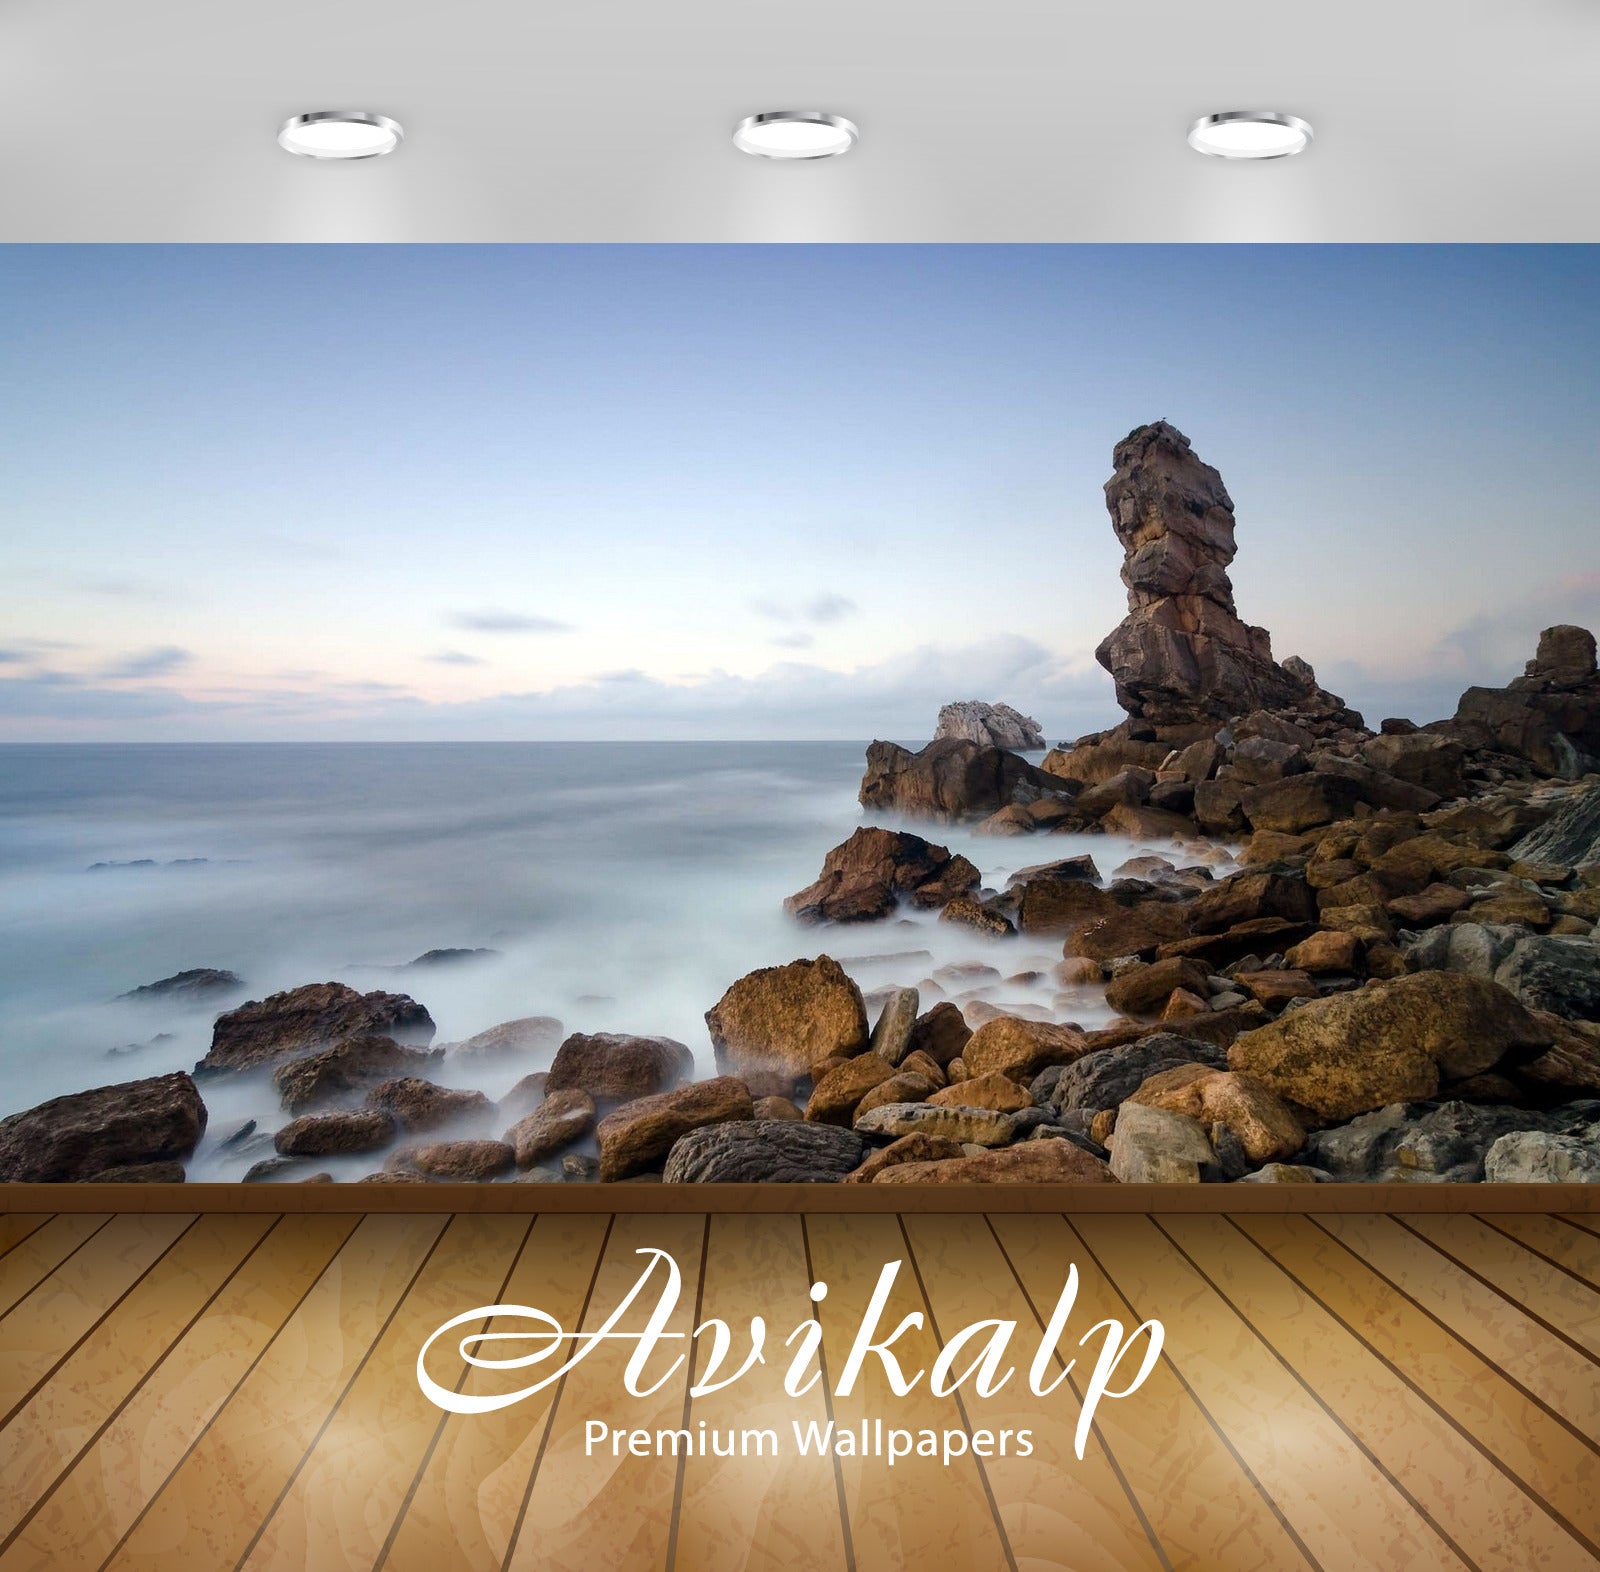 Avikalp Exclusive Awi1681 Nature Sea Shore Stones Scenery Full HD Wallpapers for Living room, Hall,